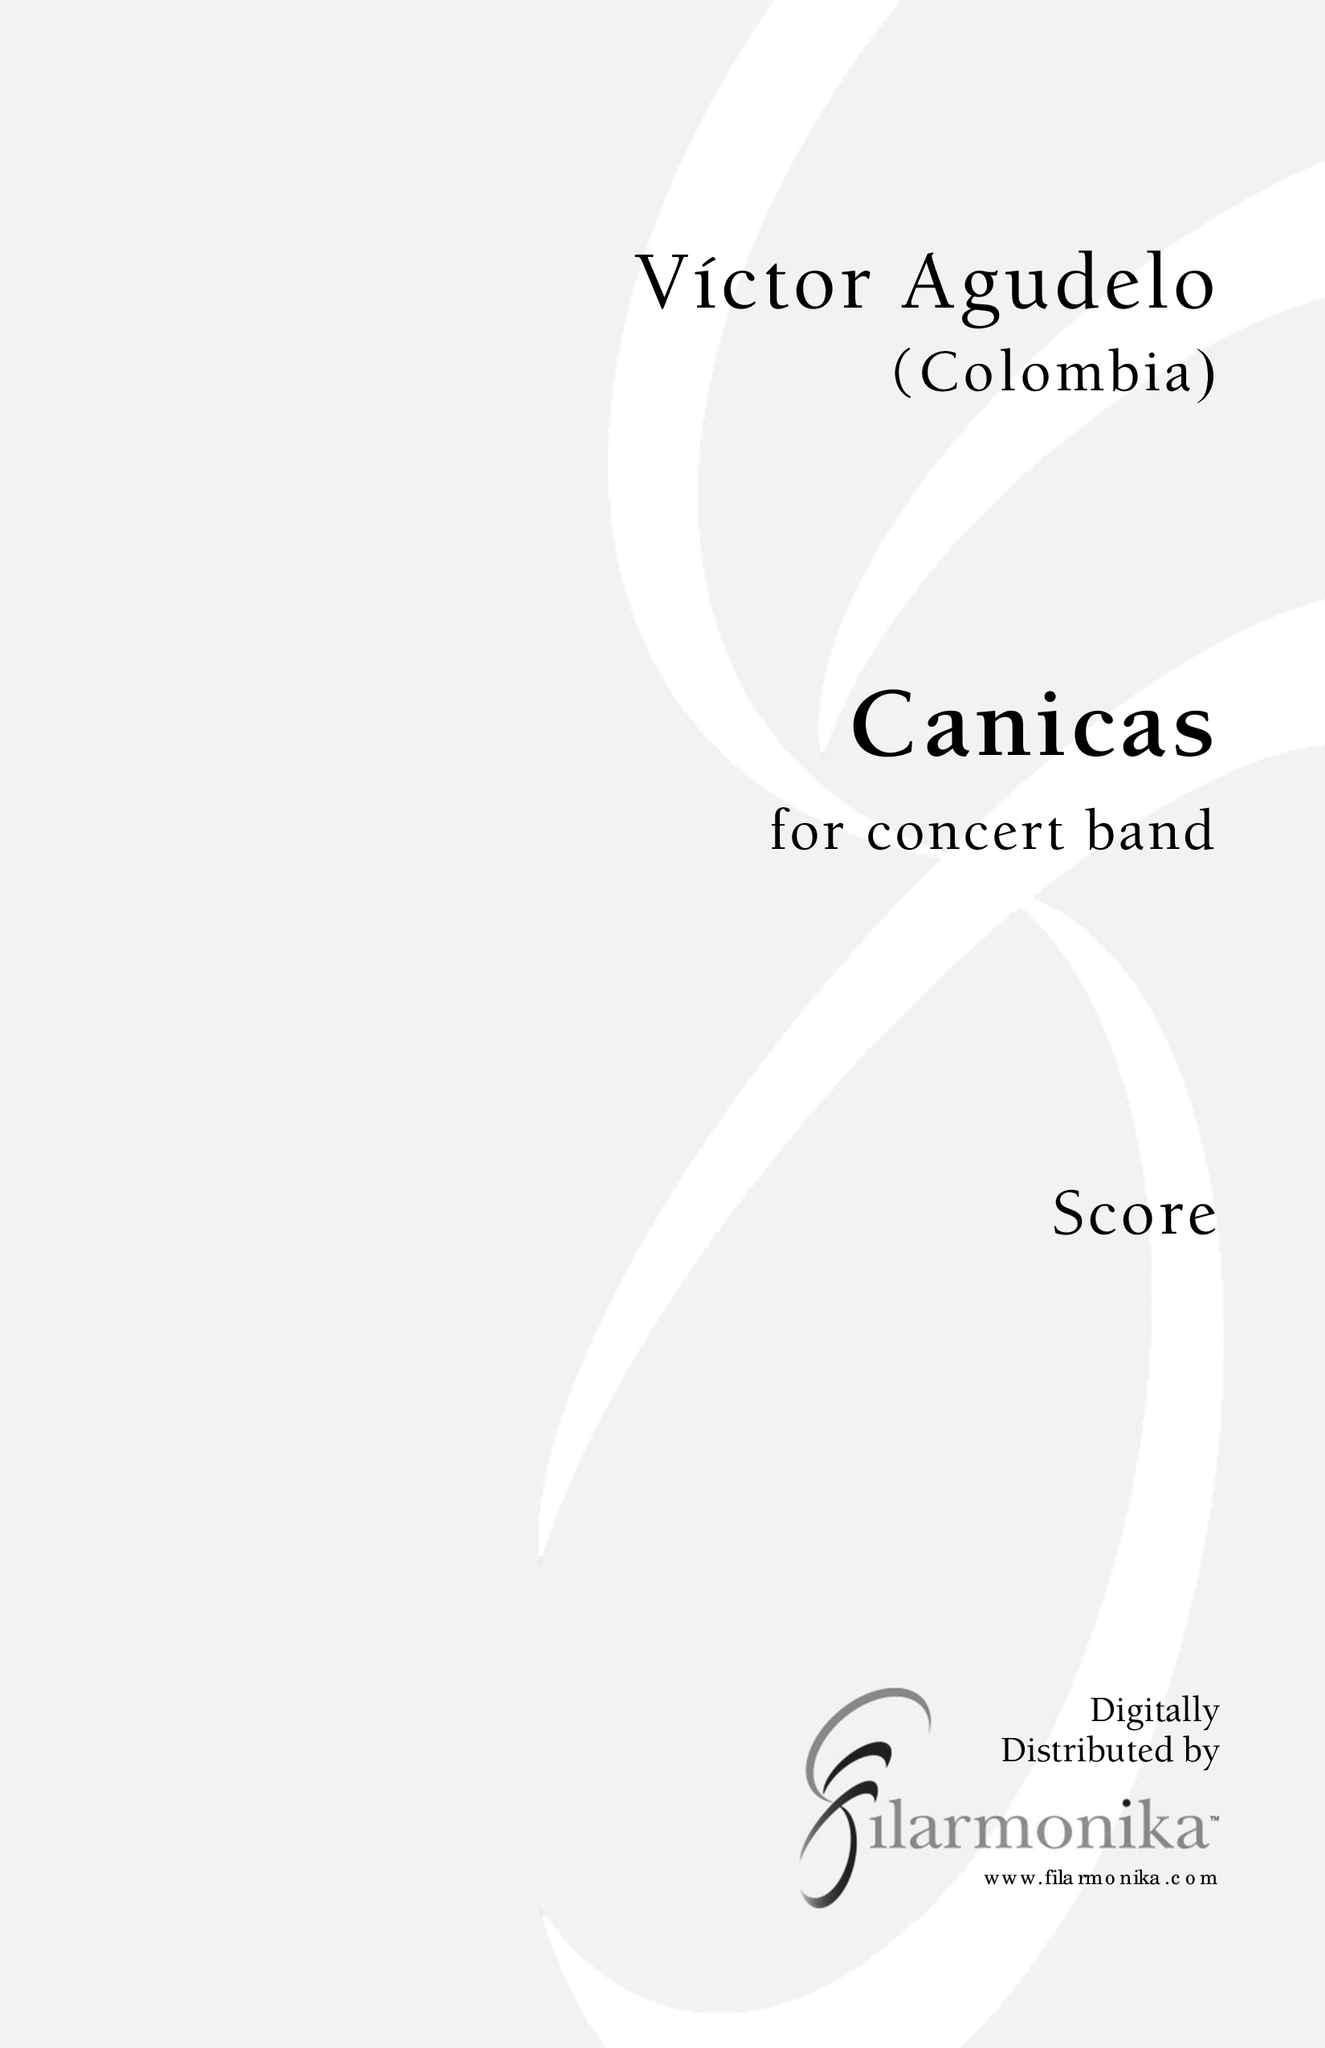 Canicas, for concert band